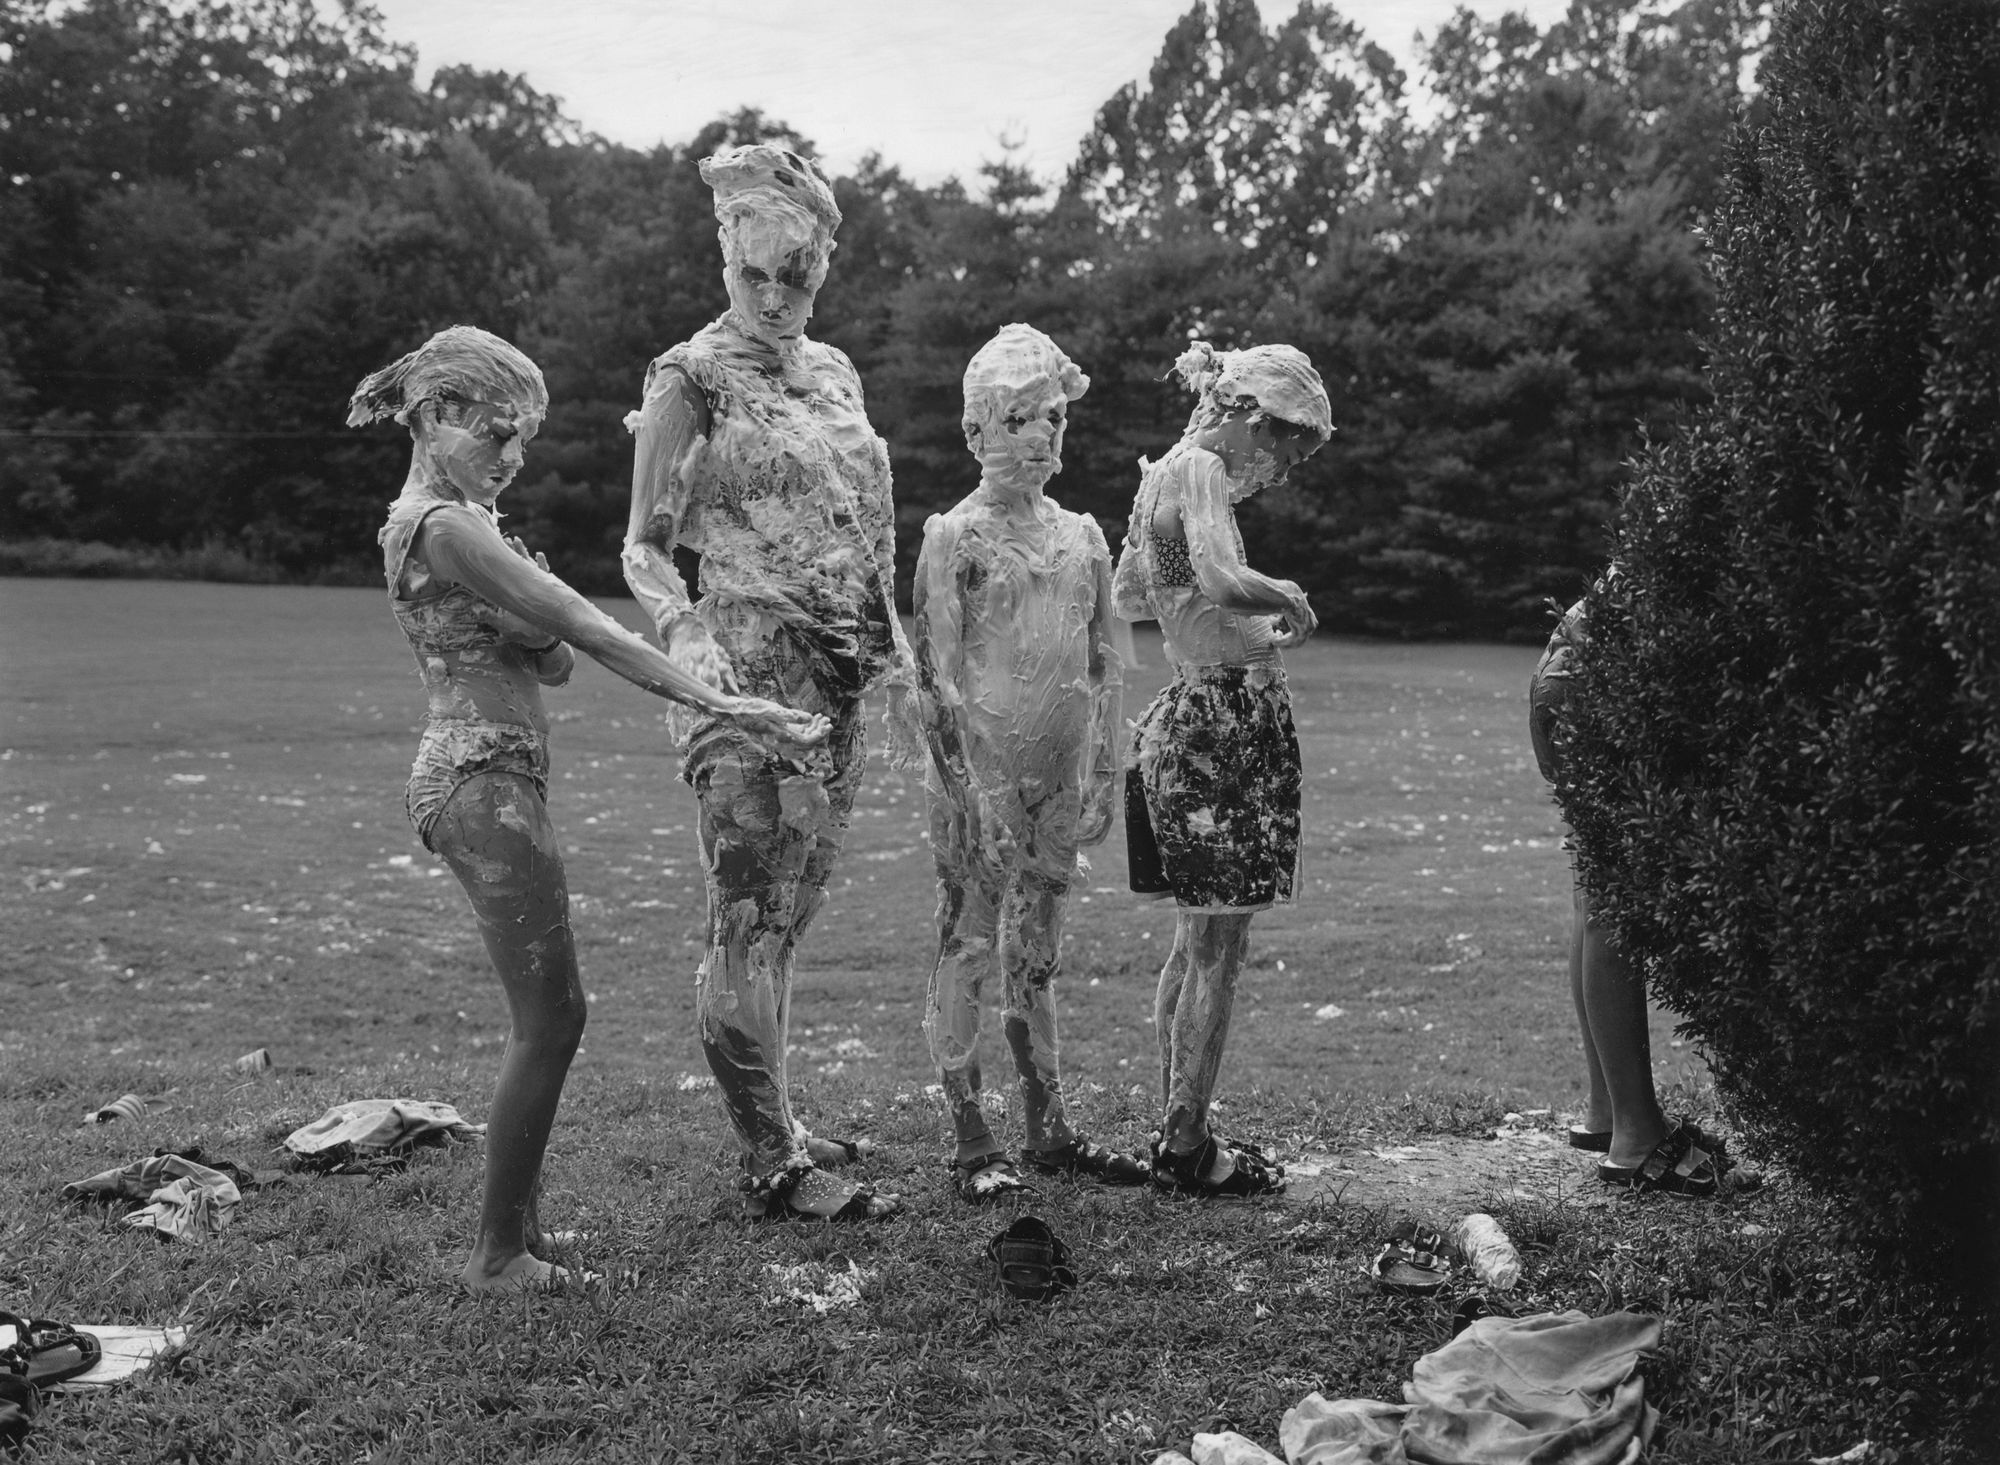 Photos from nudist camps Pron Pictures 2023